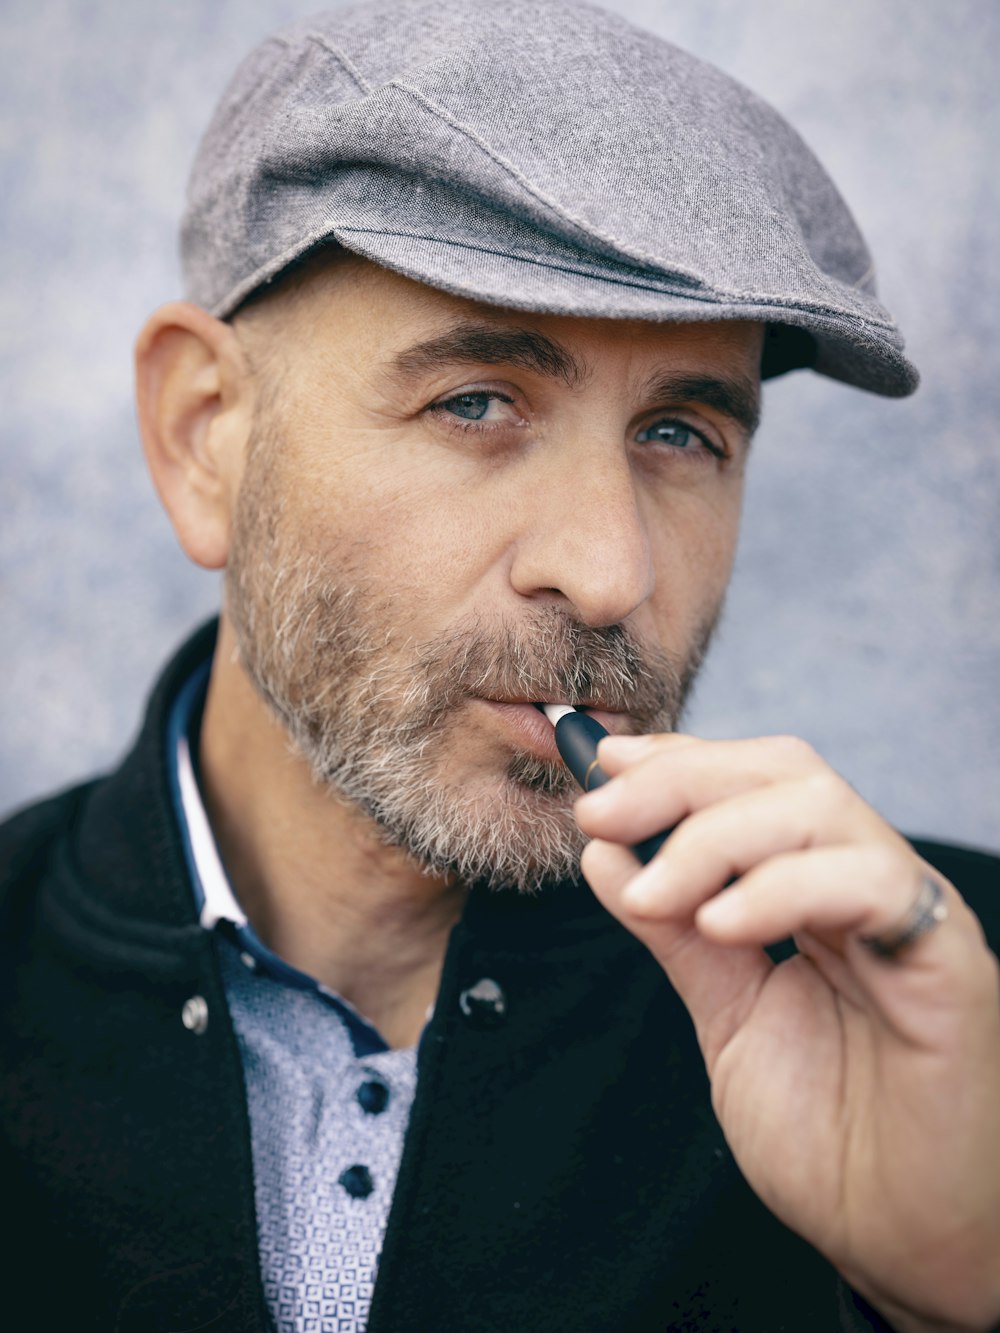 a man in a hat is smoking a cigarette